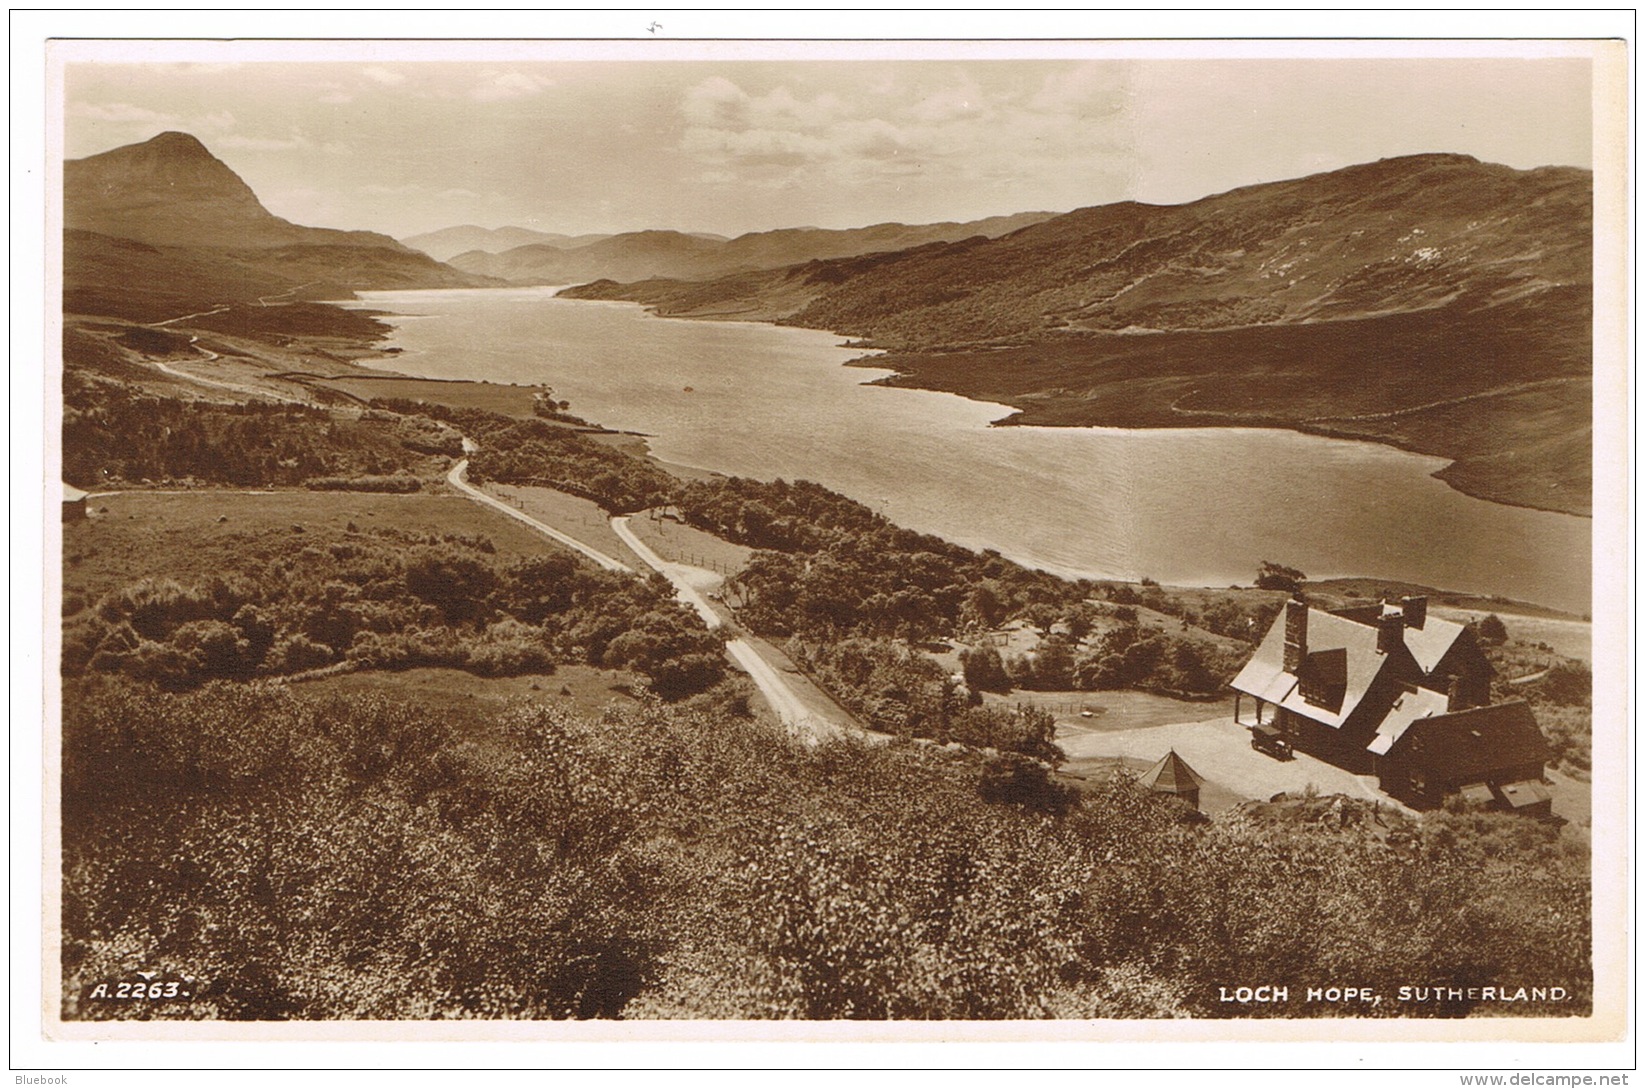 RB 1099 - Real Photo Postcard - Car Outside Chalet - Loch Hope - Sutherland Scotland - Sutherland